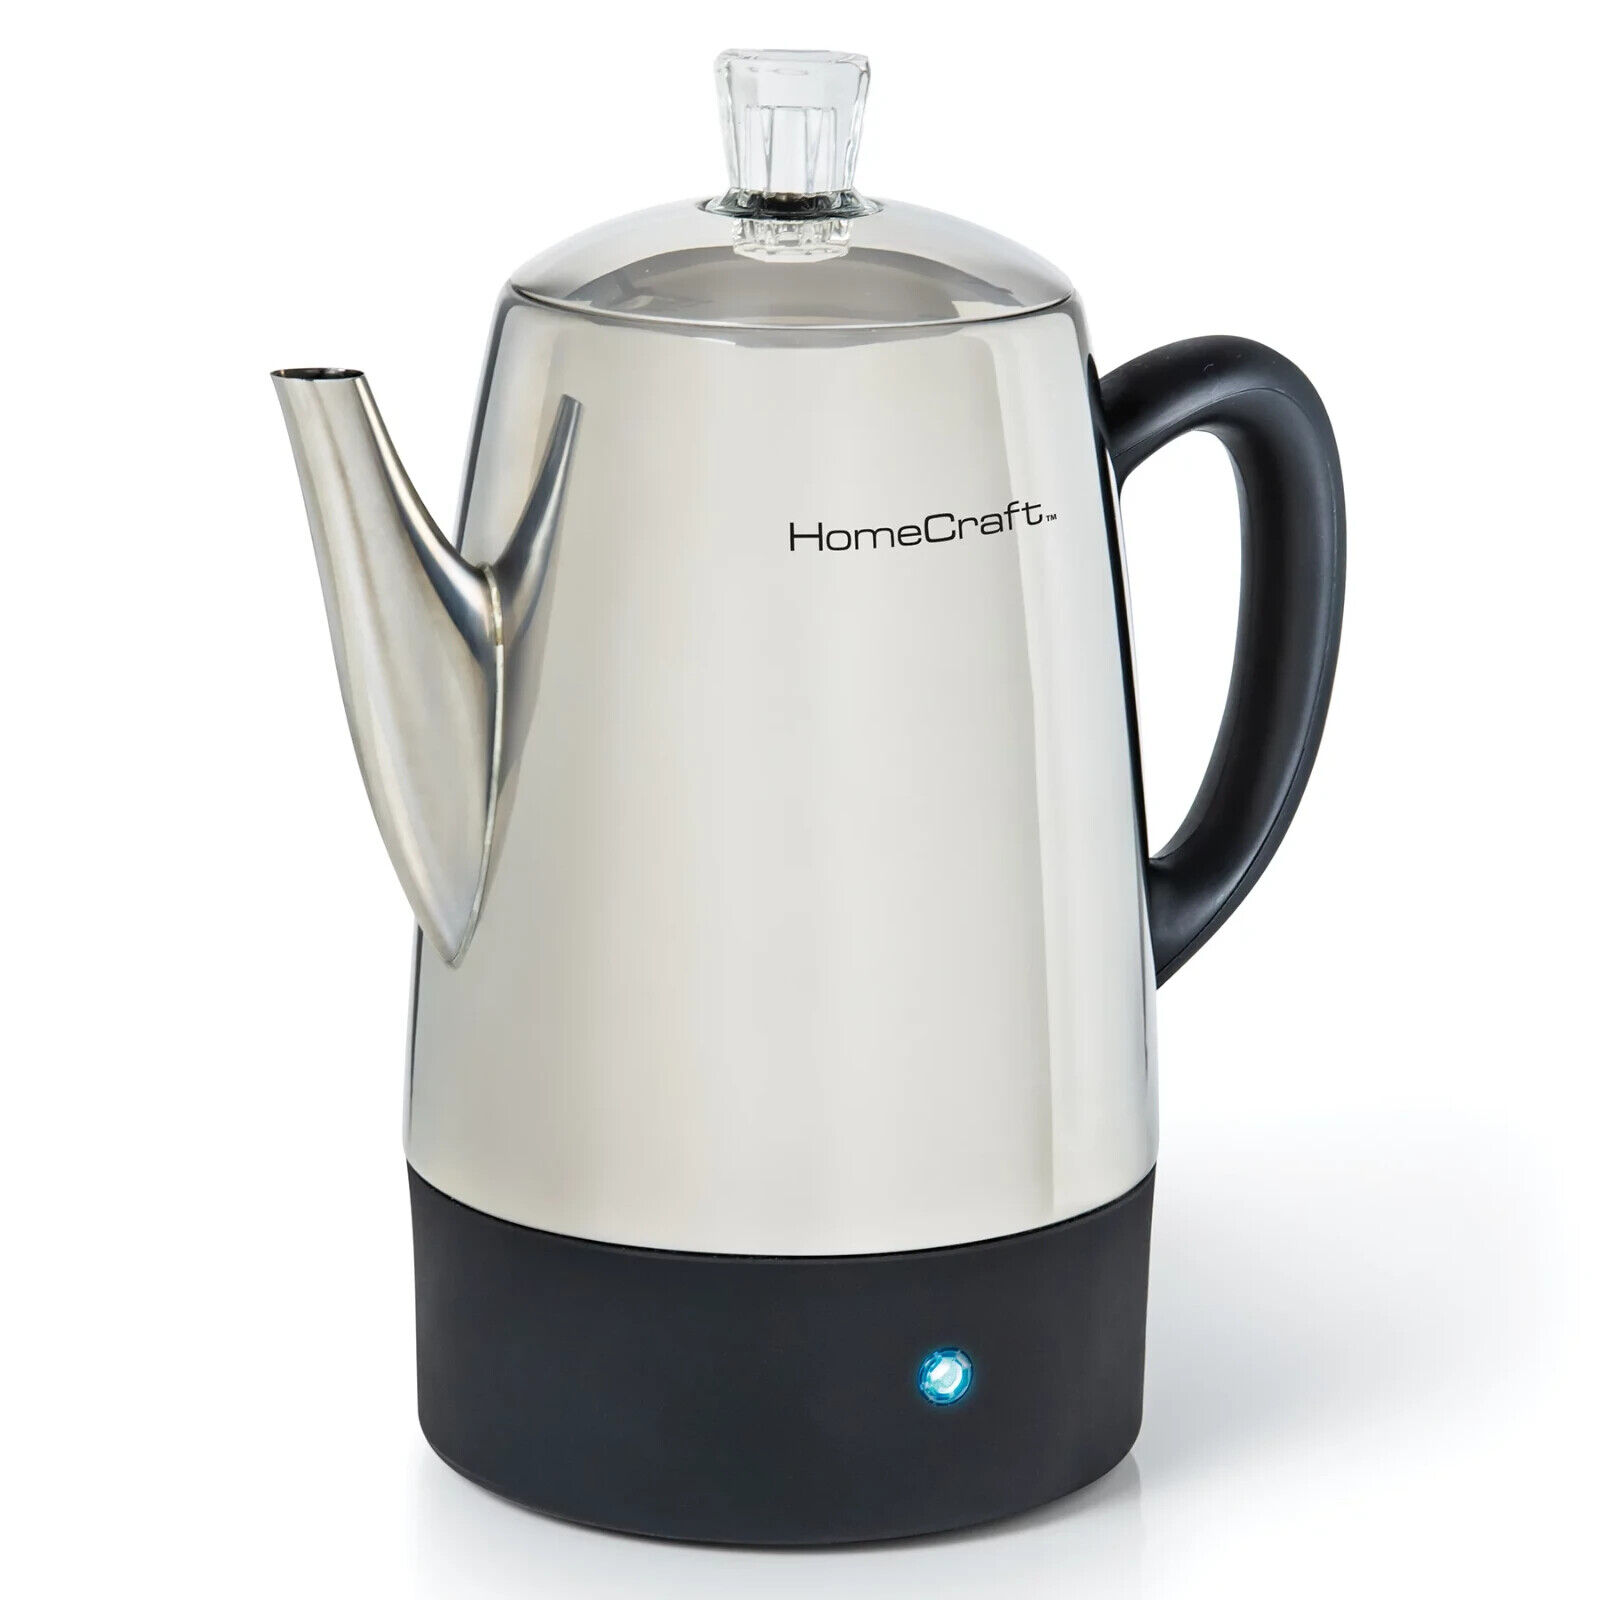 HomeCraft HCPC10SS 10-Cup Stainless Steel Coffee Maker Percolator Easy-Pour S...